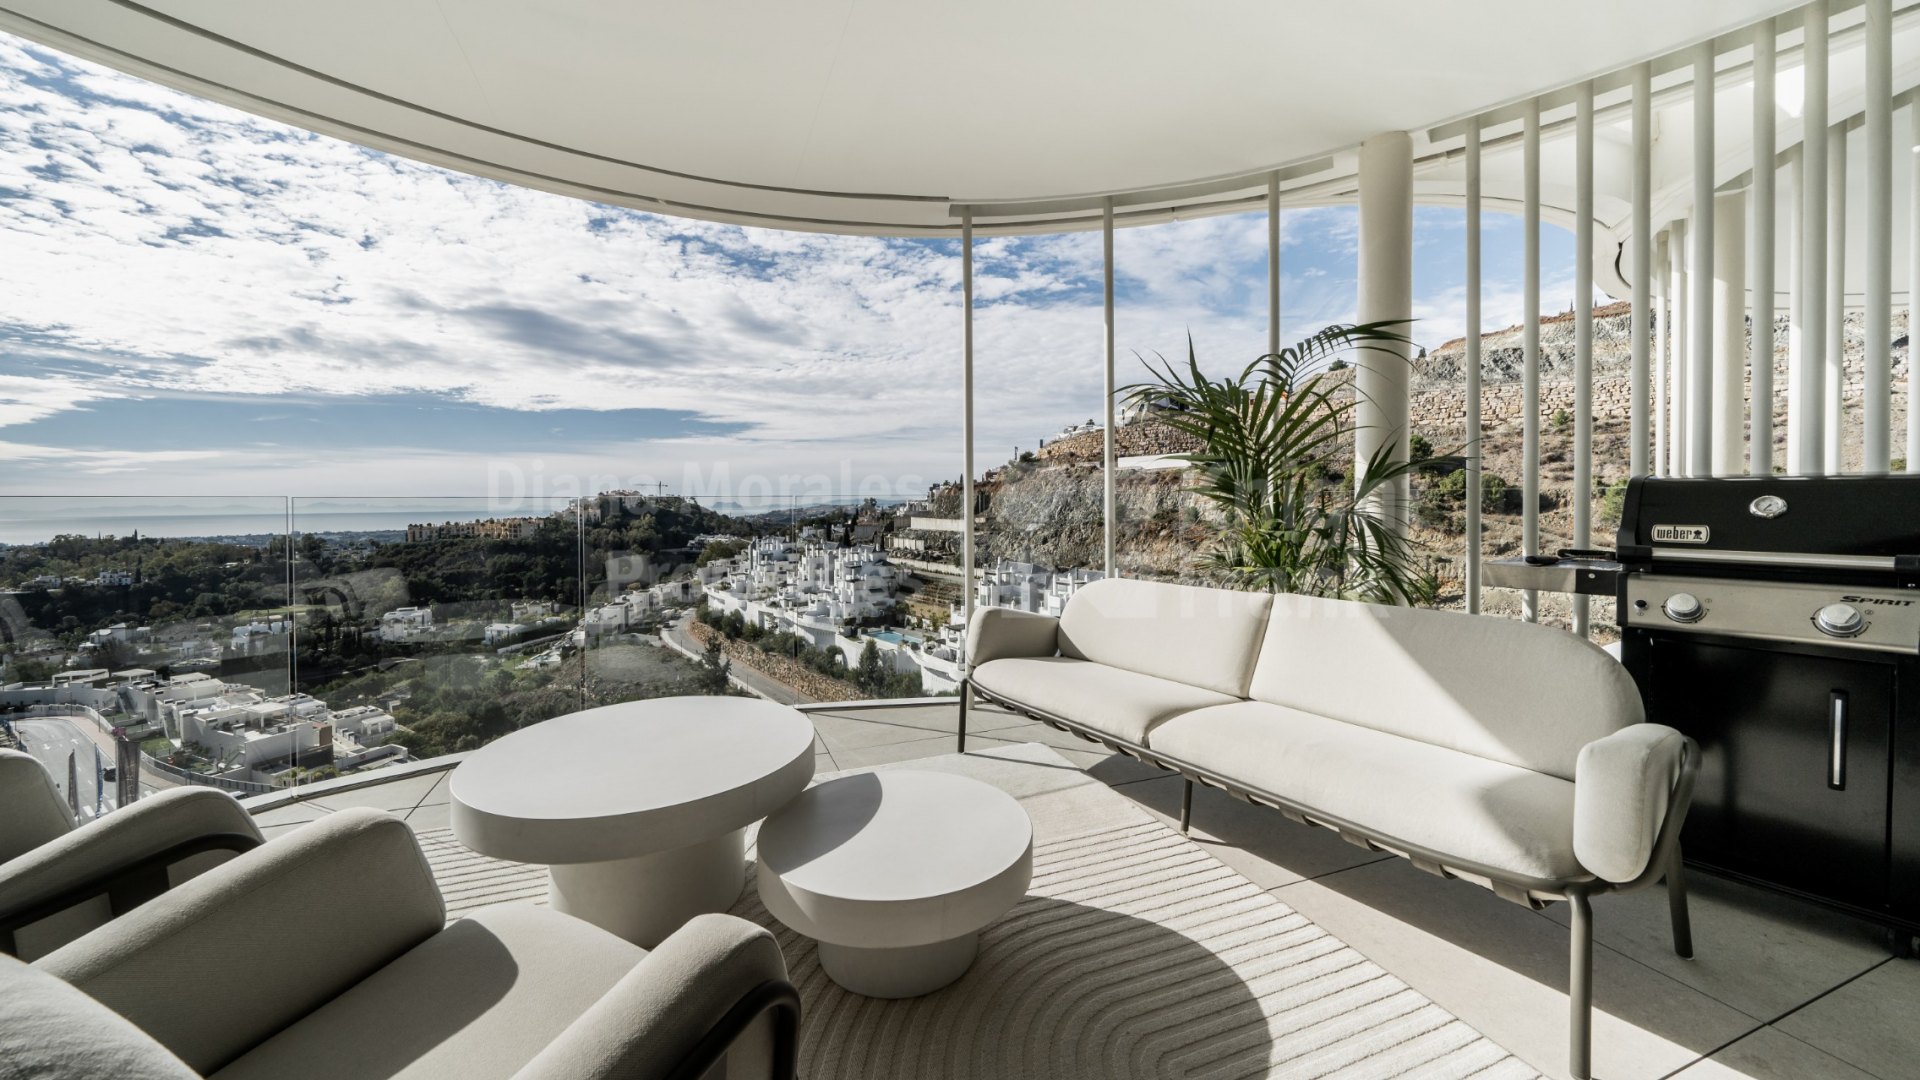 The View Marbella, Modern flat in gated community and panoramic views